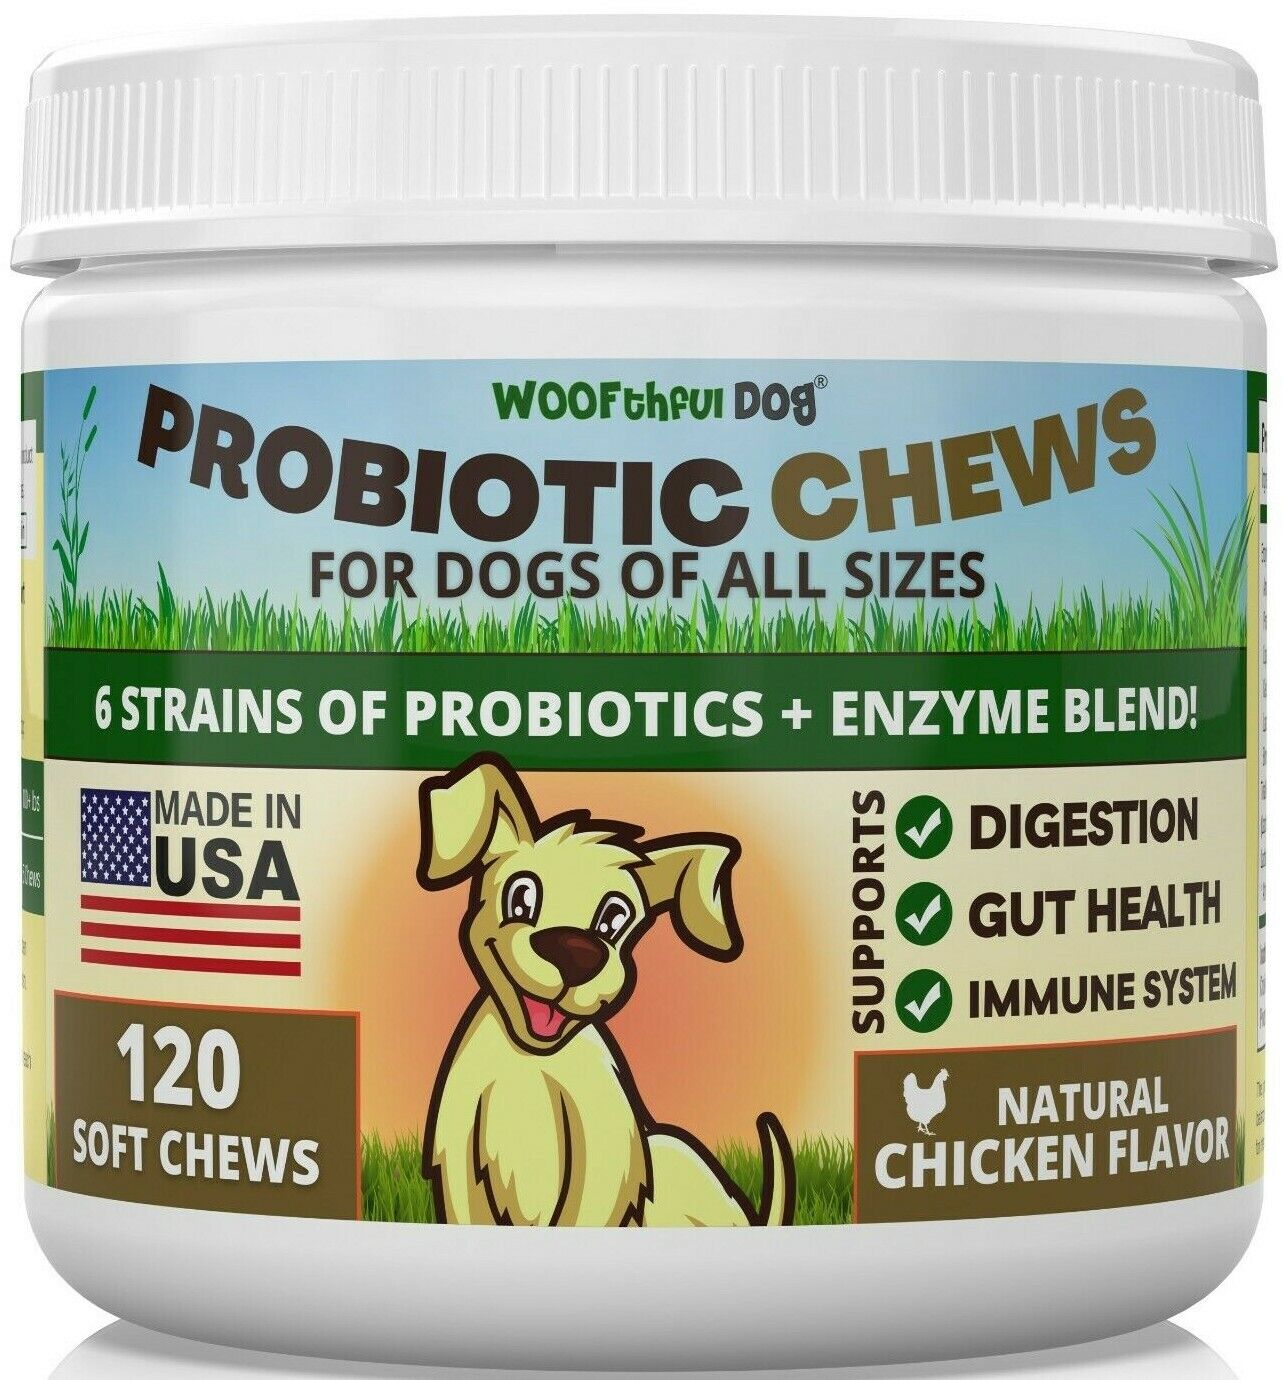 Probiotic For Dogs - 6 Strains of Probiotics + Enzyme Blend Made USA